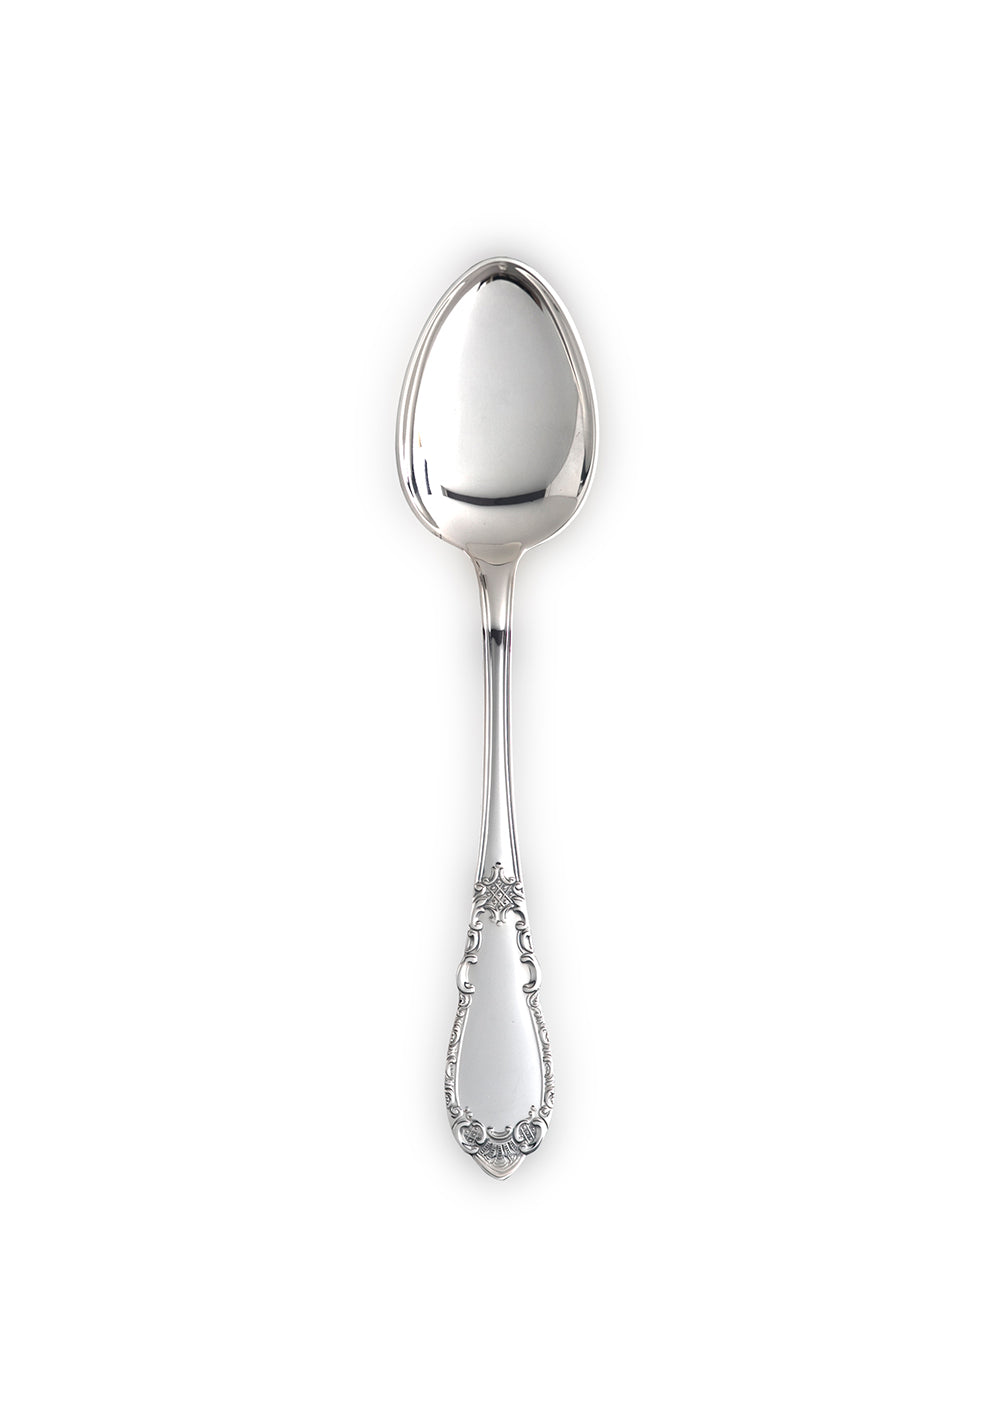 Noble little tablespoon